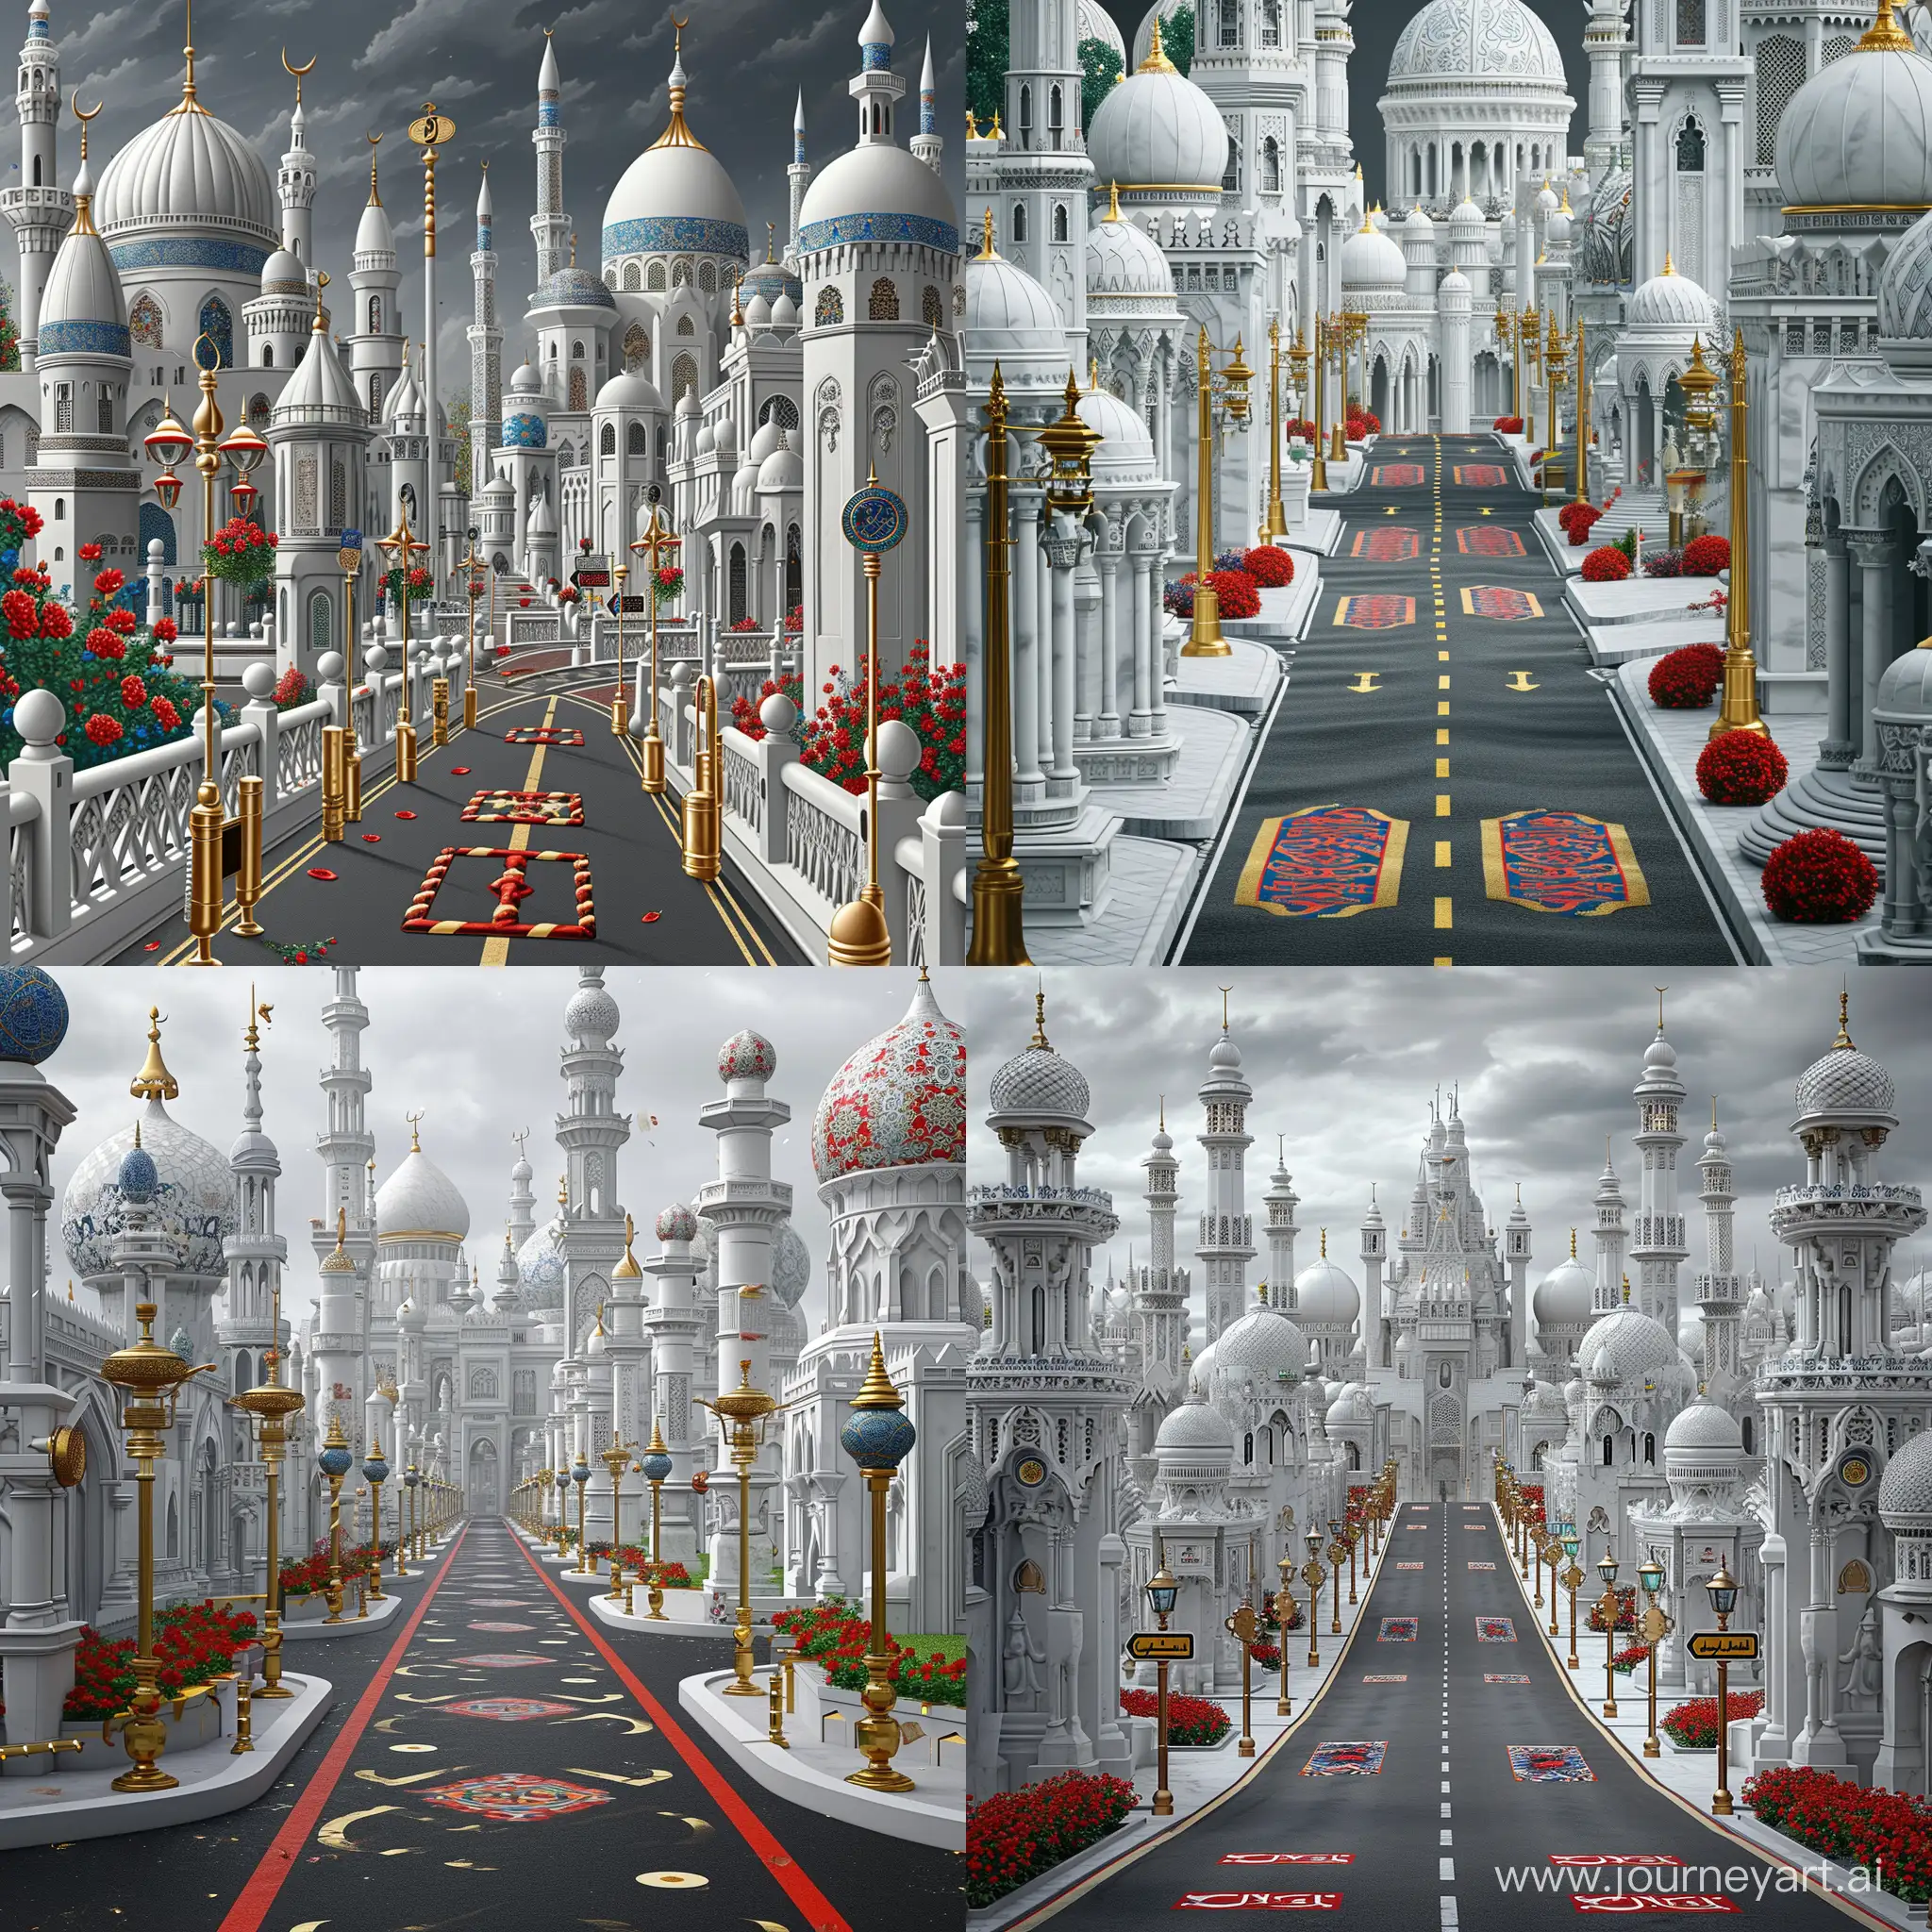 a road of medieval islamic city, full of many white marbled Islamic architectures and mosques, having red blue arabesque and persian tile floral motifs, London road markings, golden bollarded sidewalks, islamic ornamented street lights, London traffic signs, red green flowers, dark grey weather --v 6